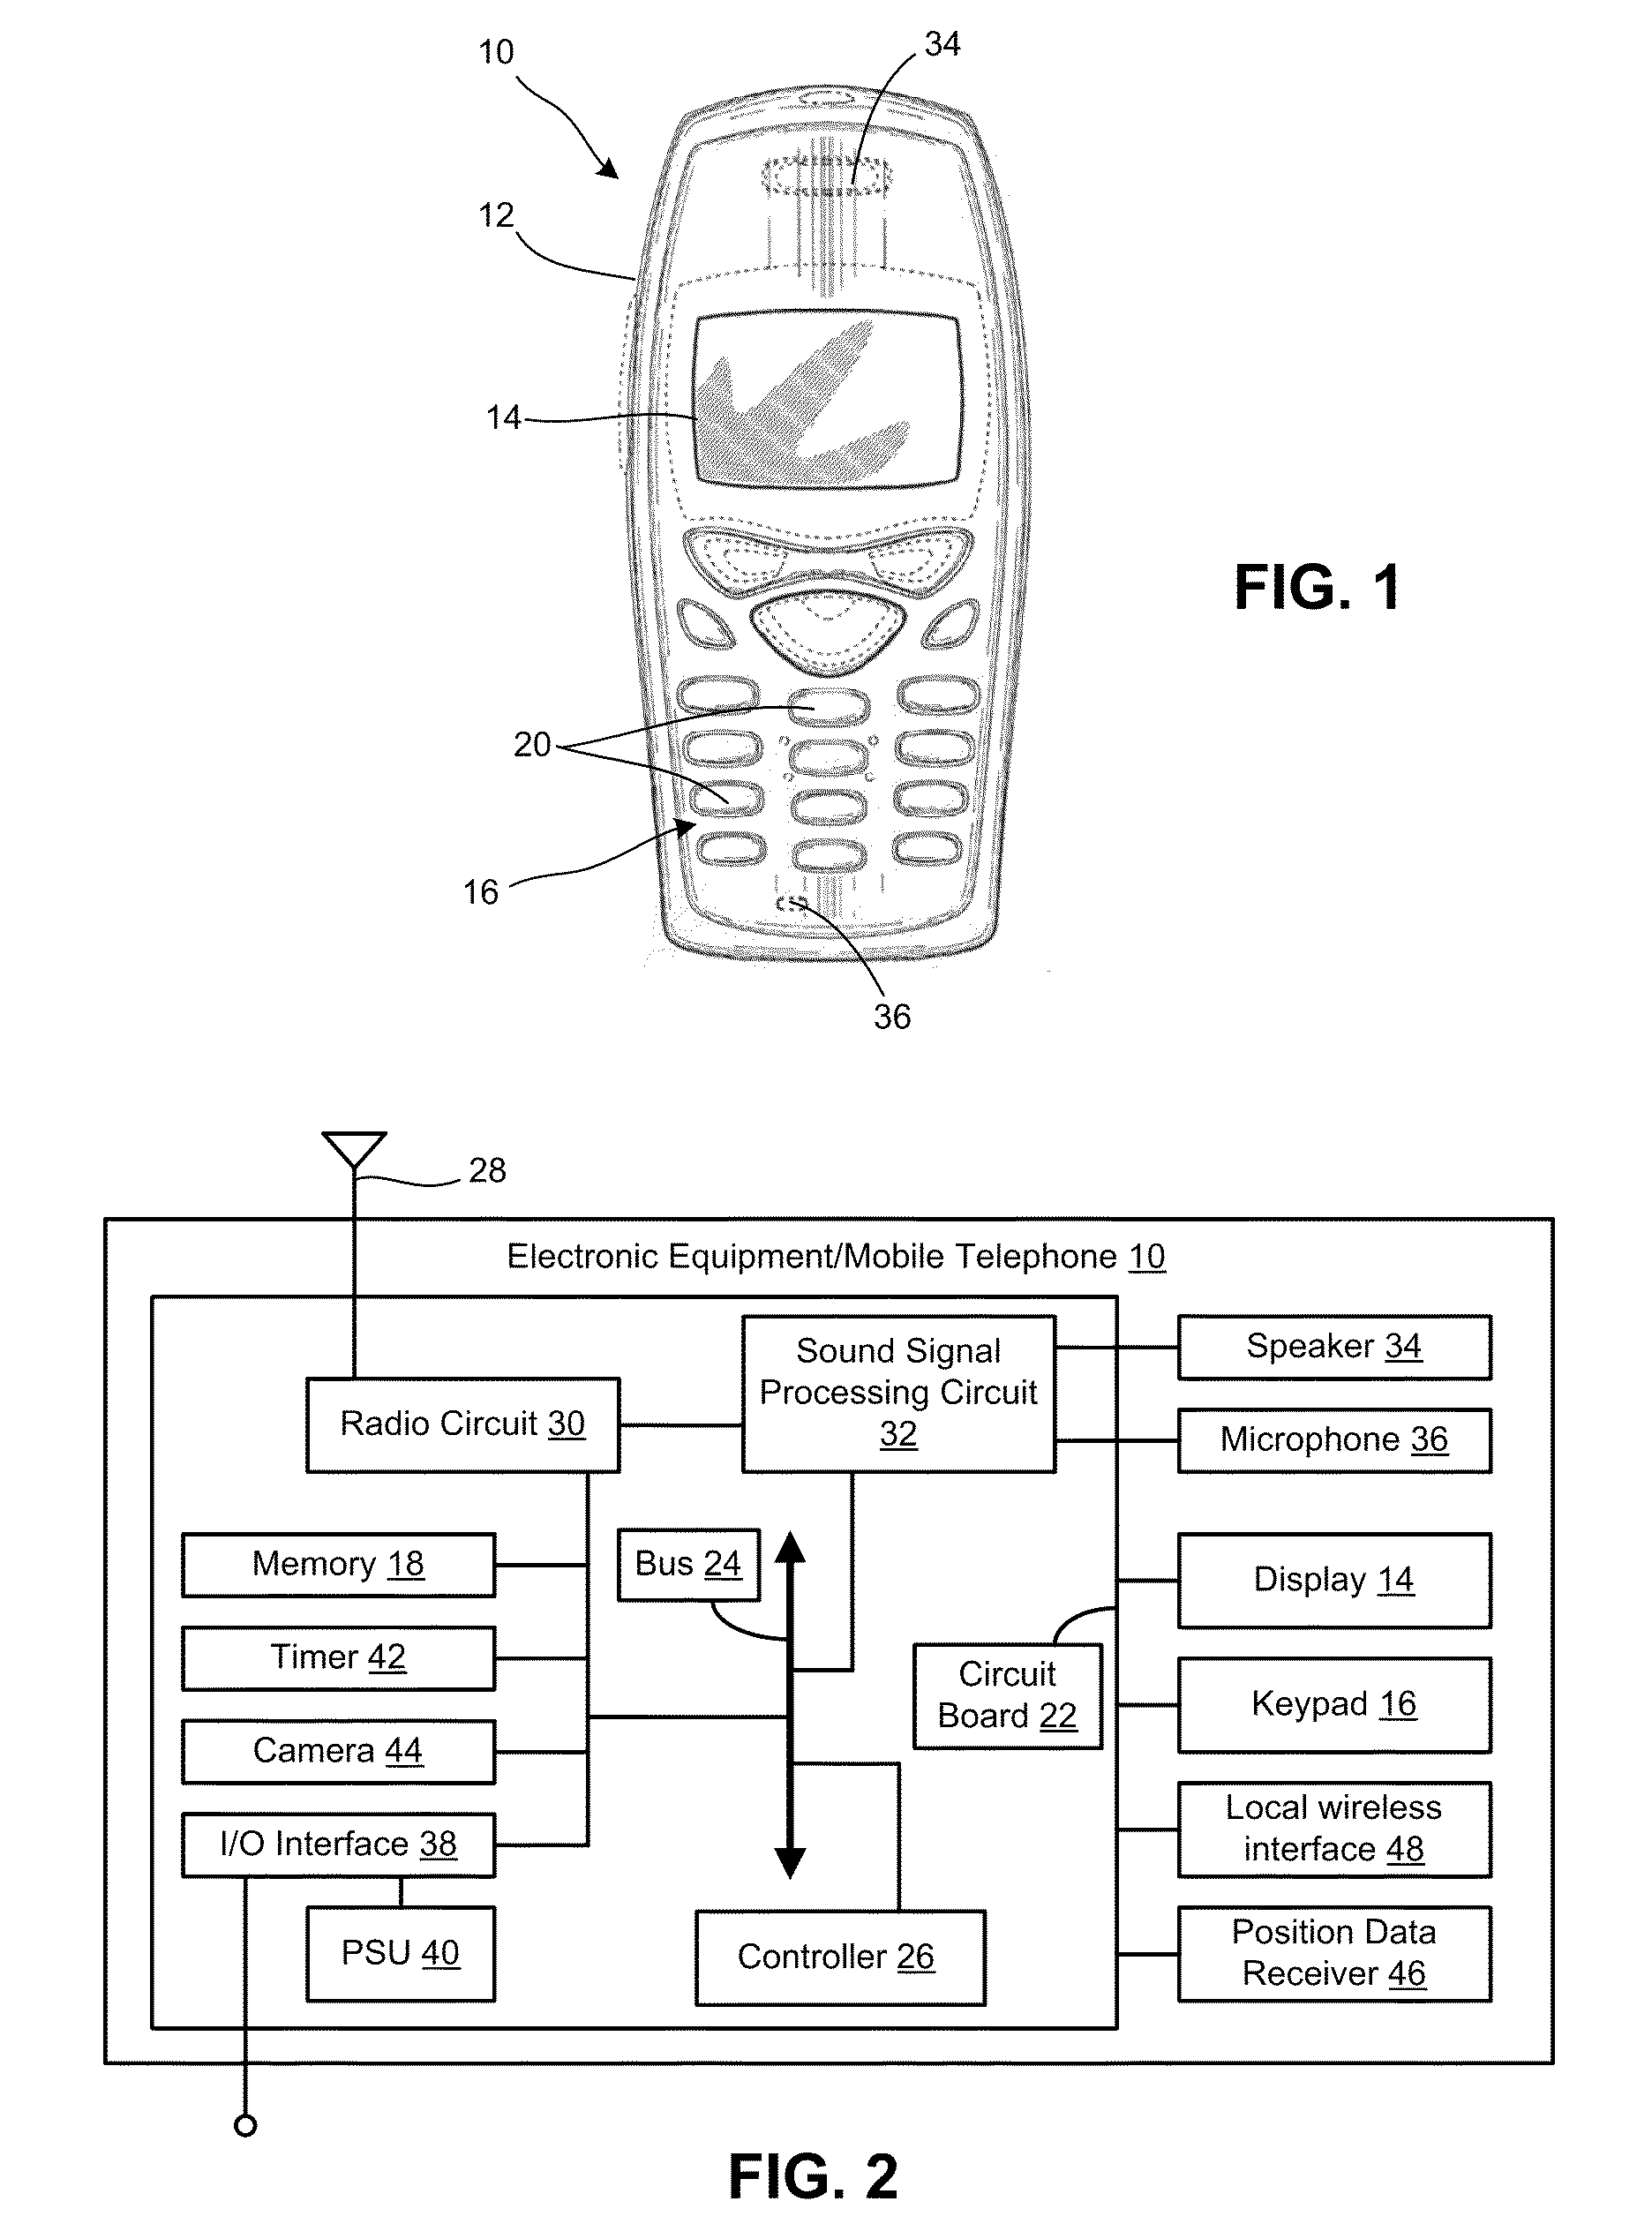 System and method for protecting circuit boards